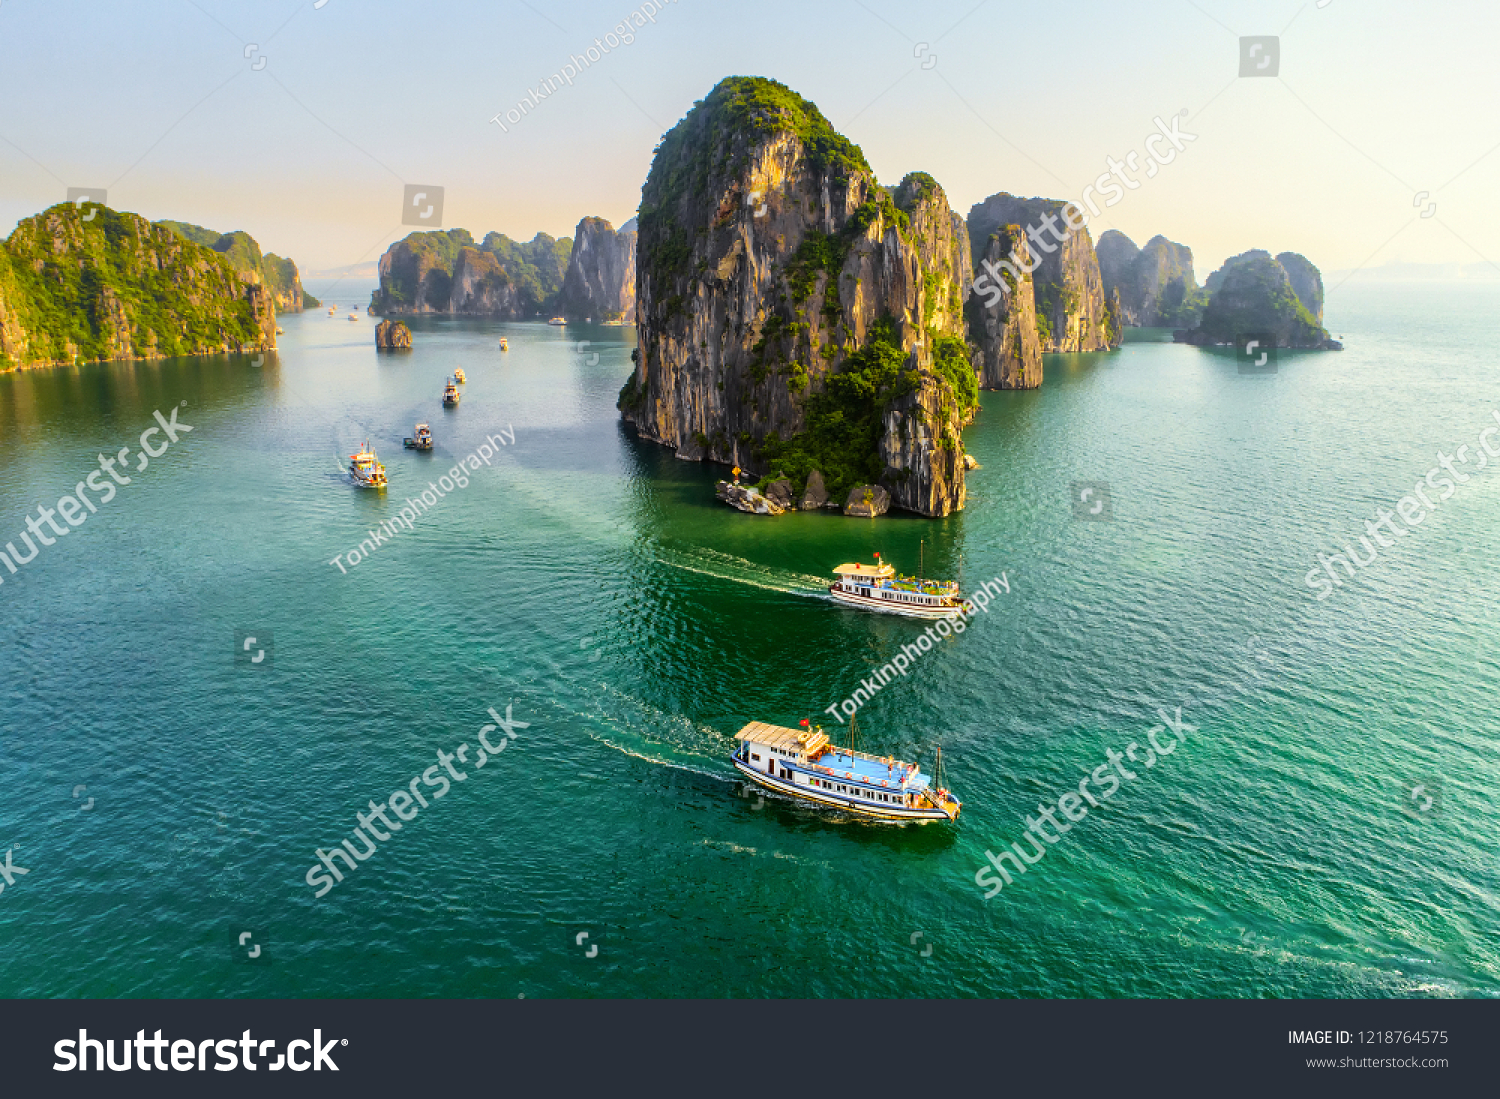 Aerial view floating fishing village and rock island, Halong Bay, Vietnam, Southeast Asia. UNESCO World Heritage Site. Junk boat cruise to Ha Long Bay. Popular landmark, famous destination of Vietnam #1218764575